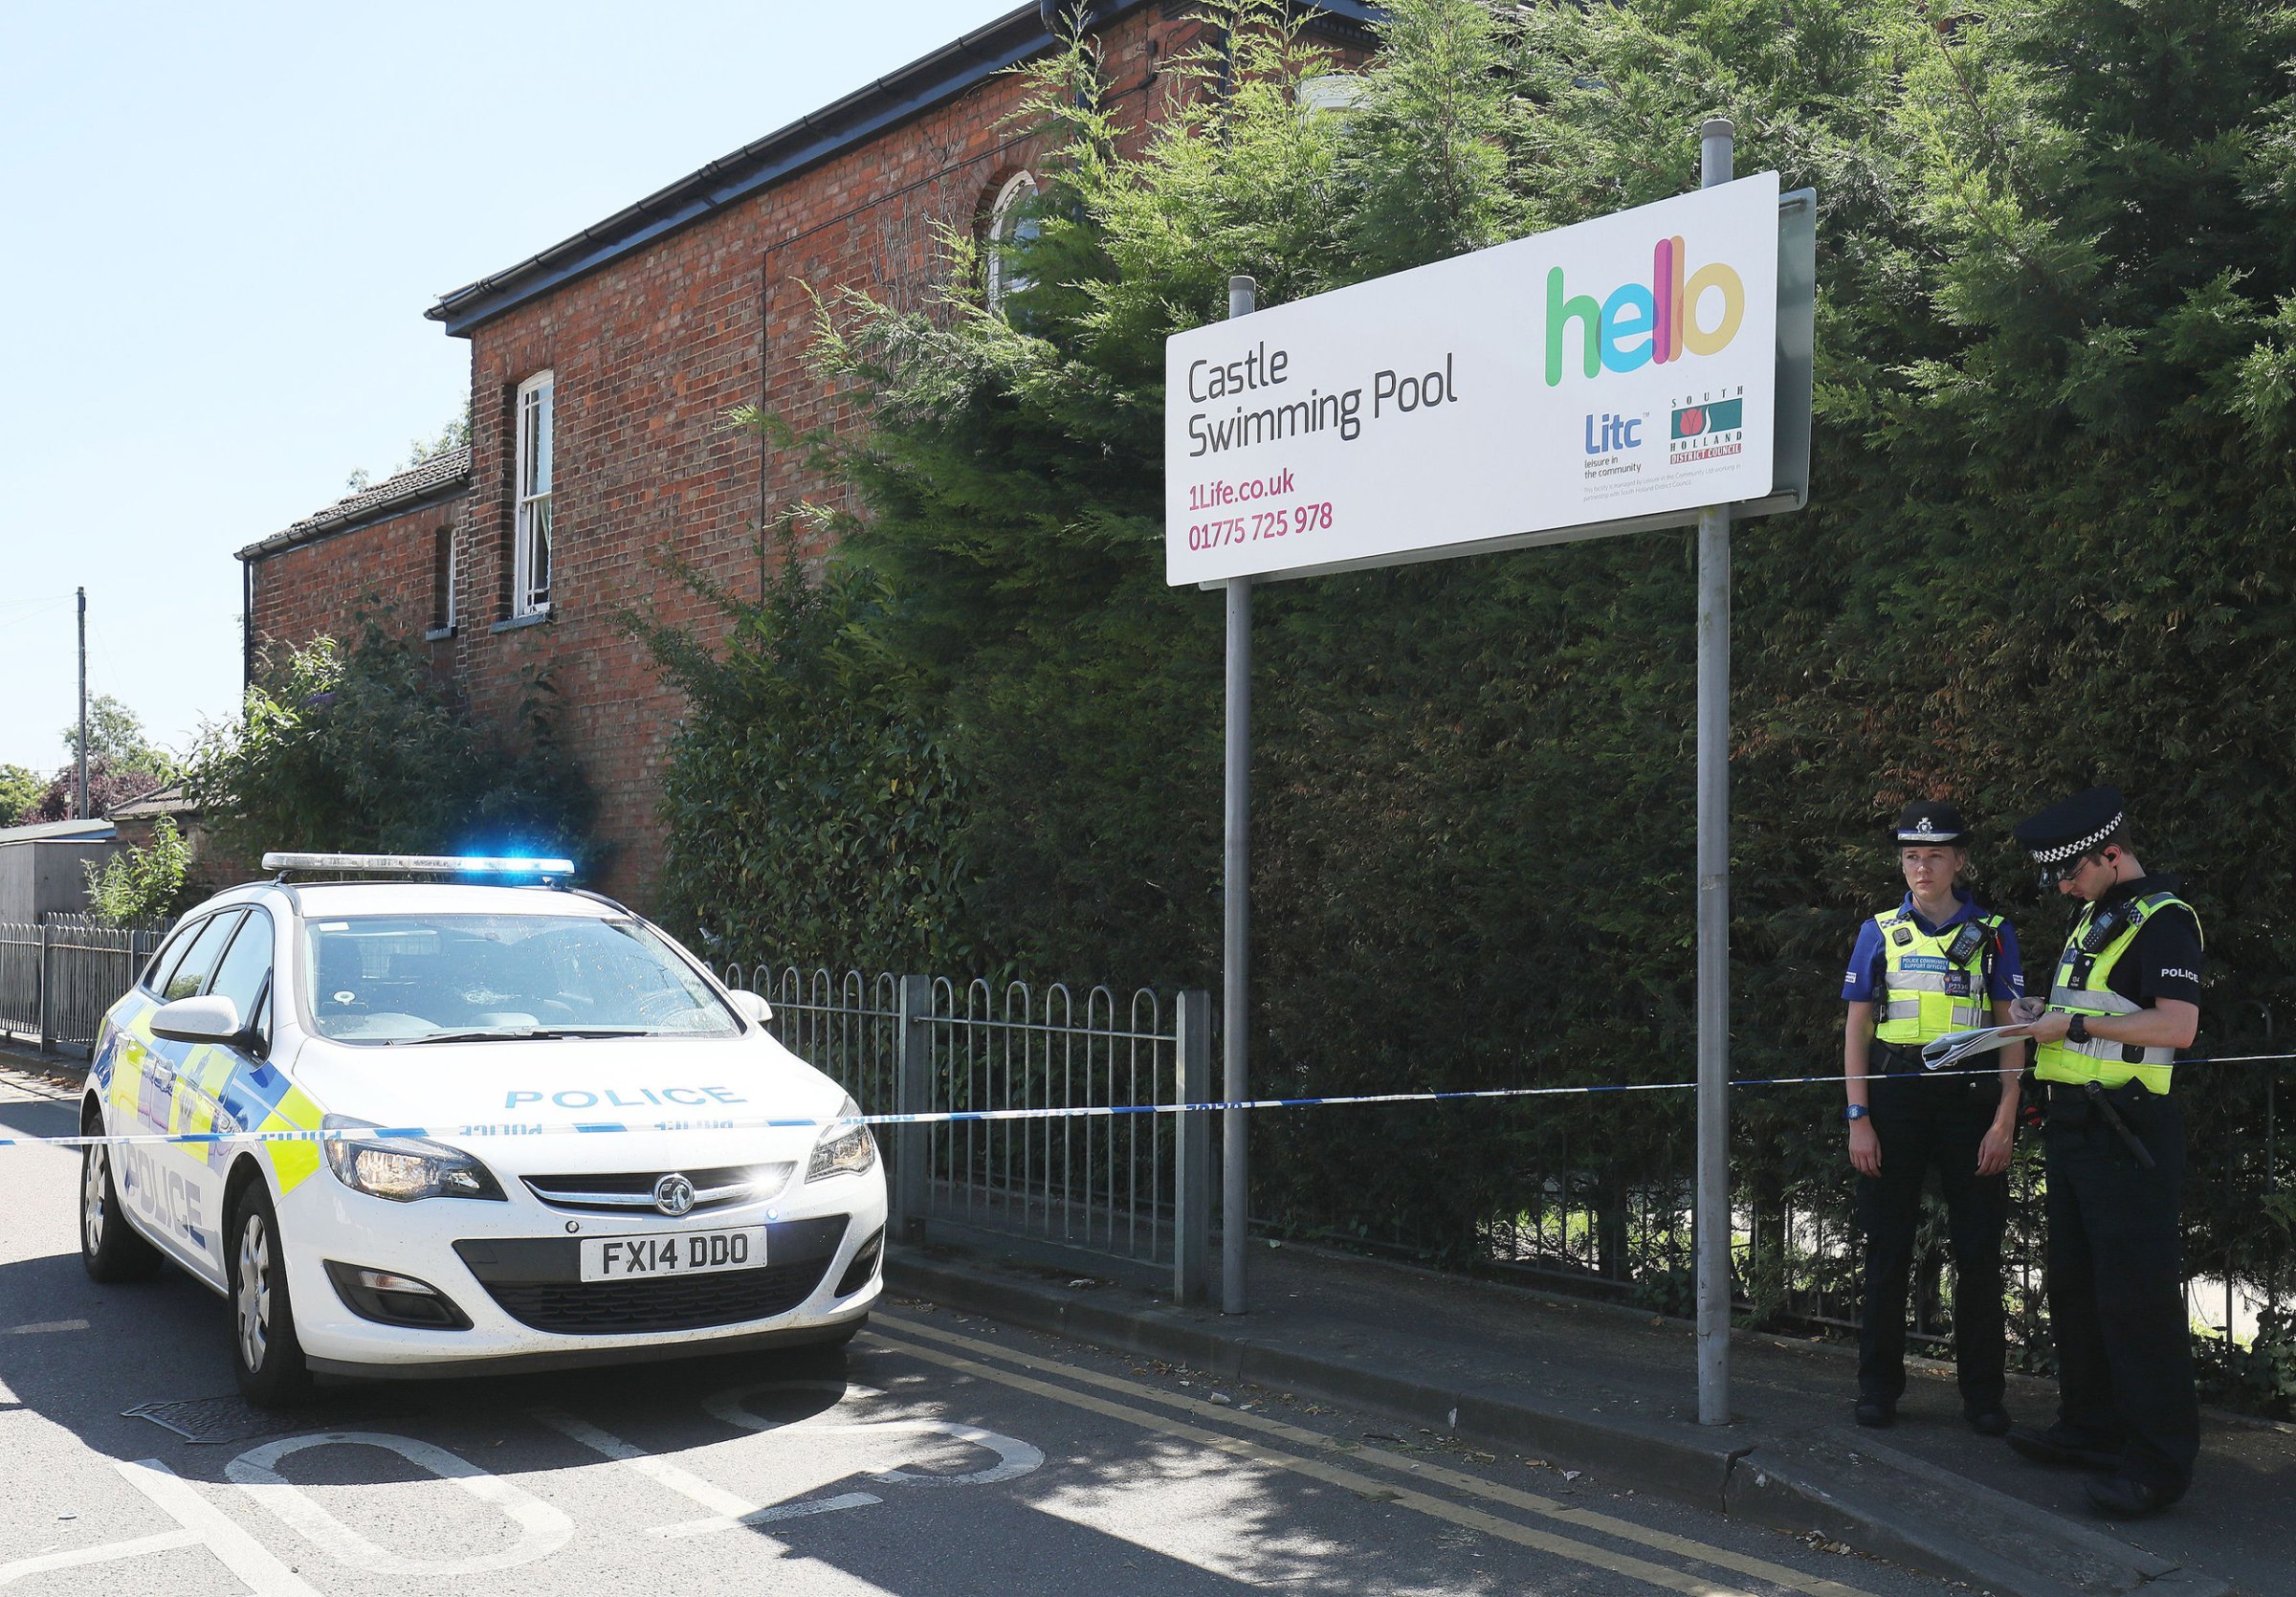 Emergency services at the scene near Castle Swimming Pool after three people including a suspected gunman have been shot dead in Spalding, Lincolnshire on July 19, 2016.